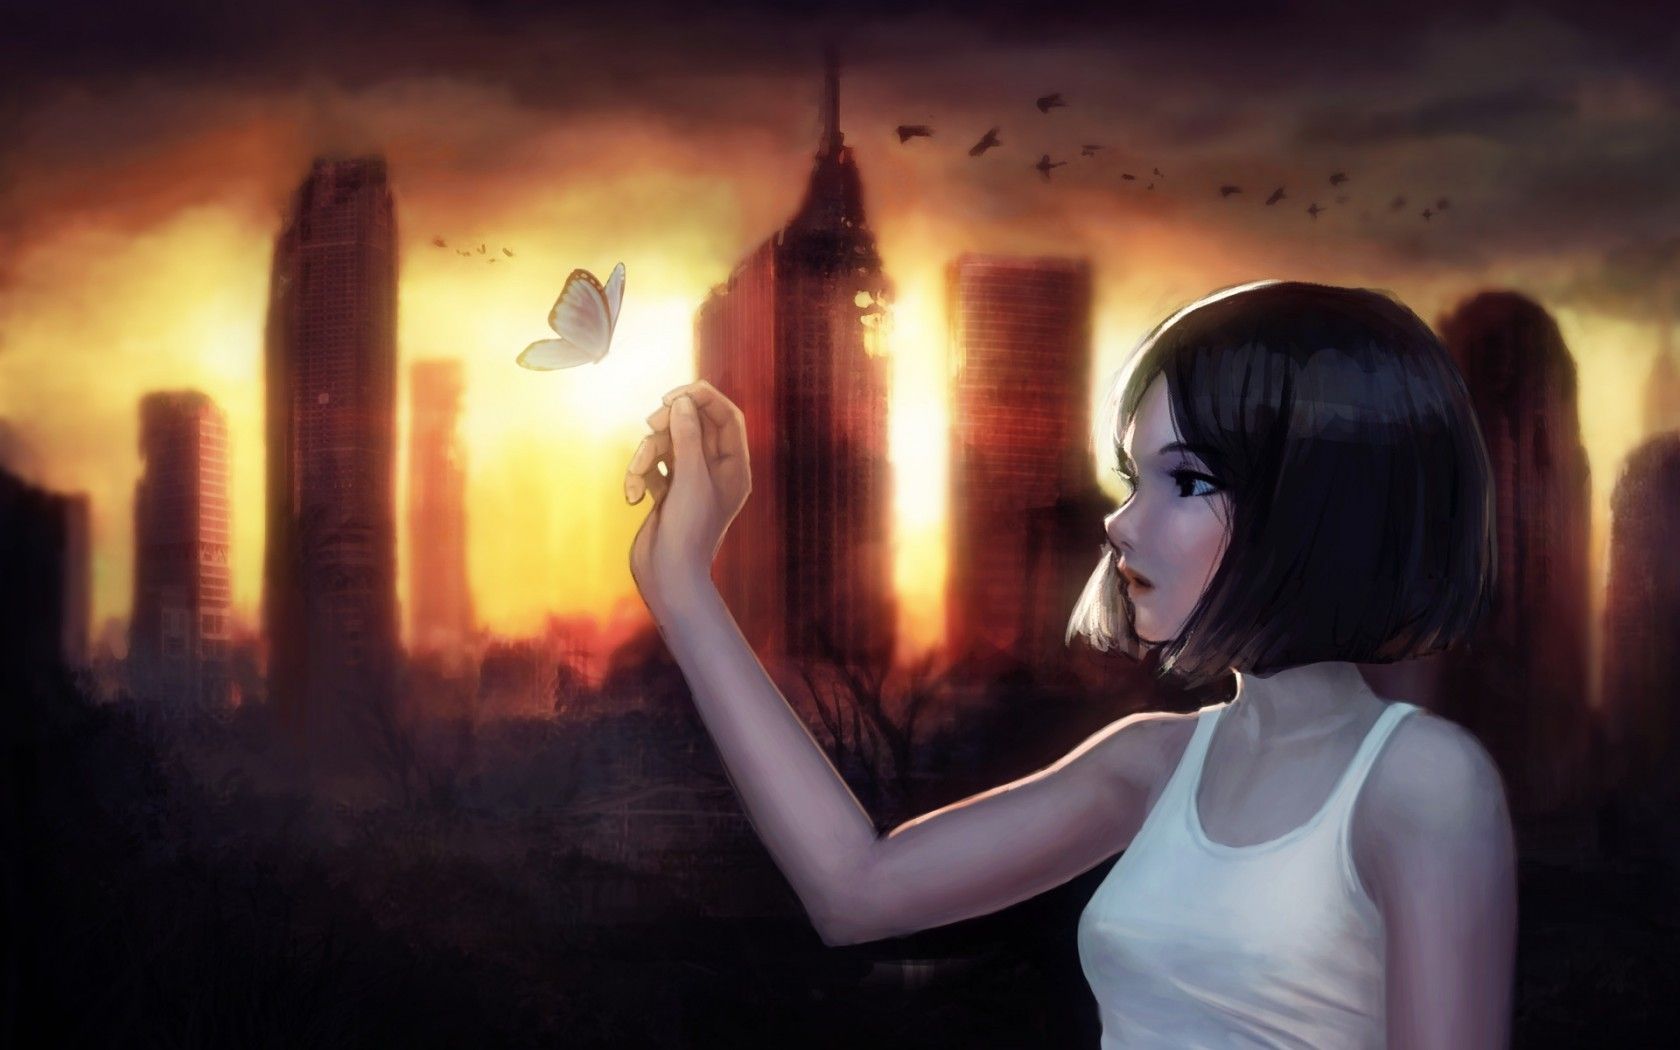 Download 1680x1050 Anime Girl, Profile View, Black Hair, Cityscape